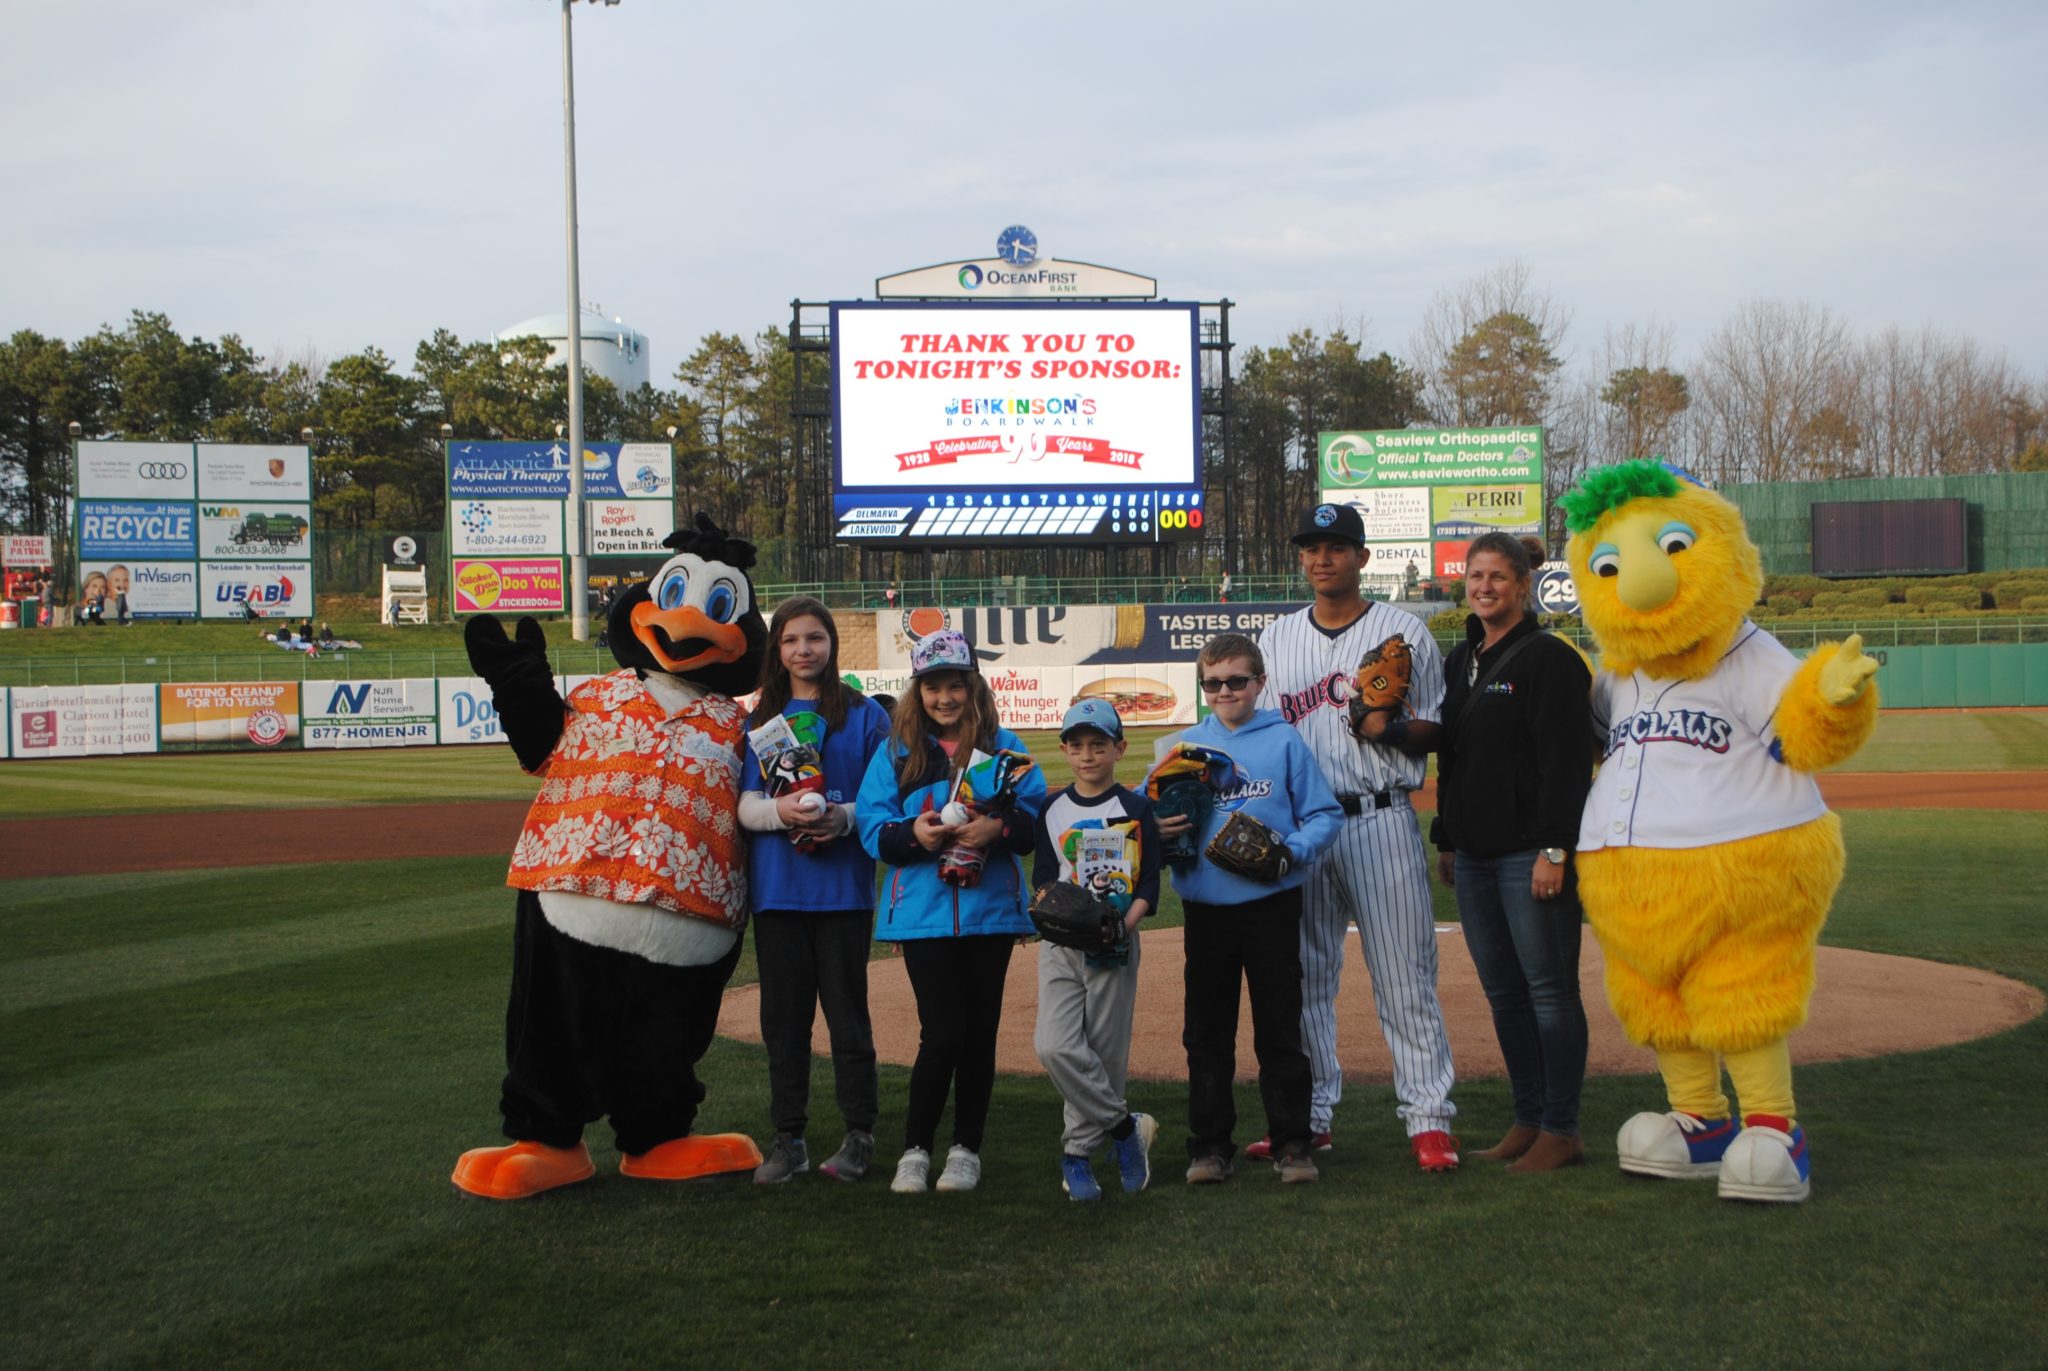 Mascots and fans on The Blueclaw's opening night in 2018 in Lakewood, NJ.